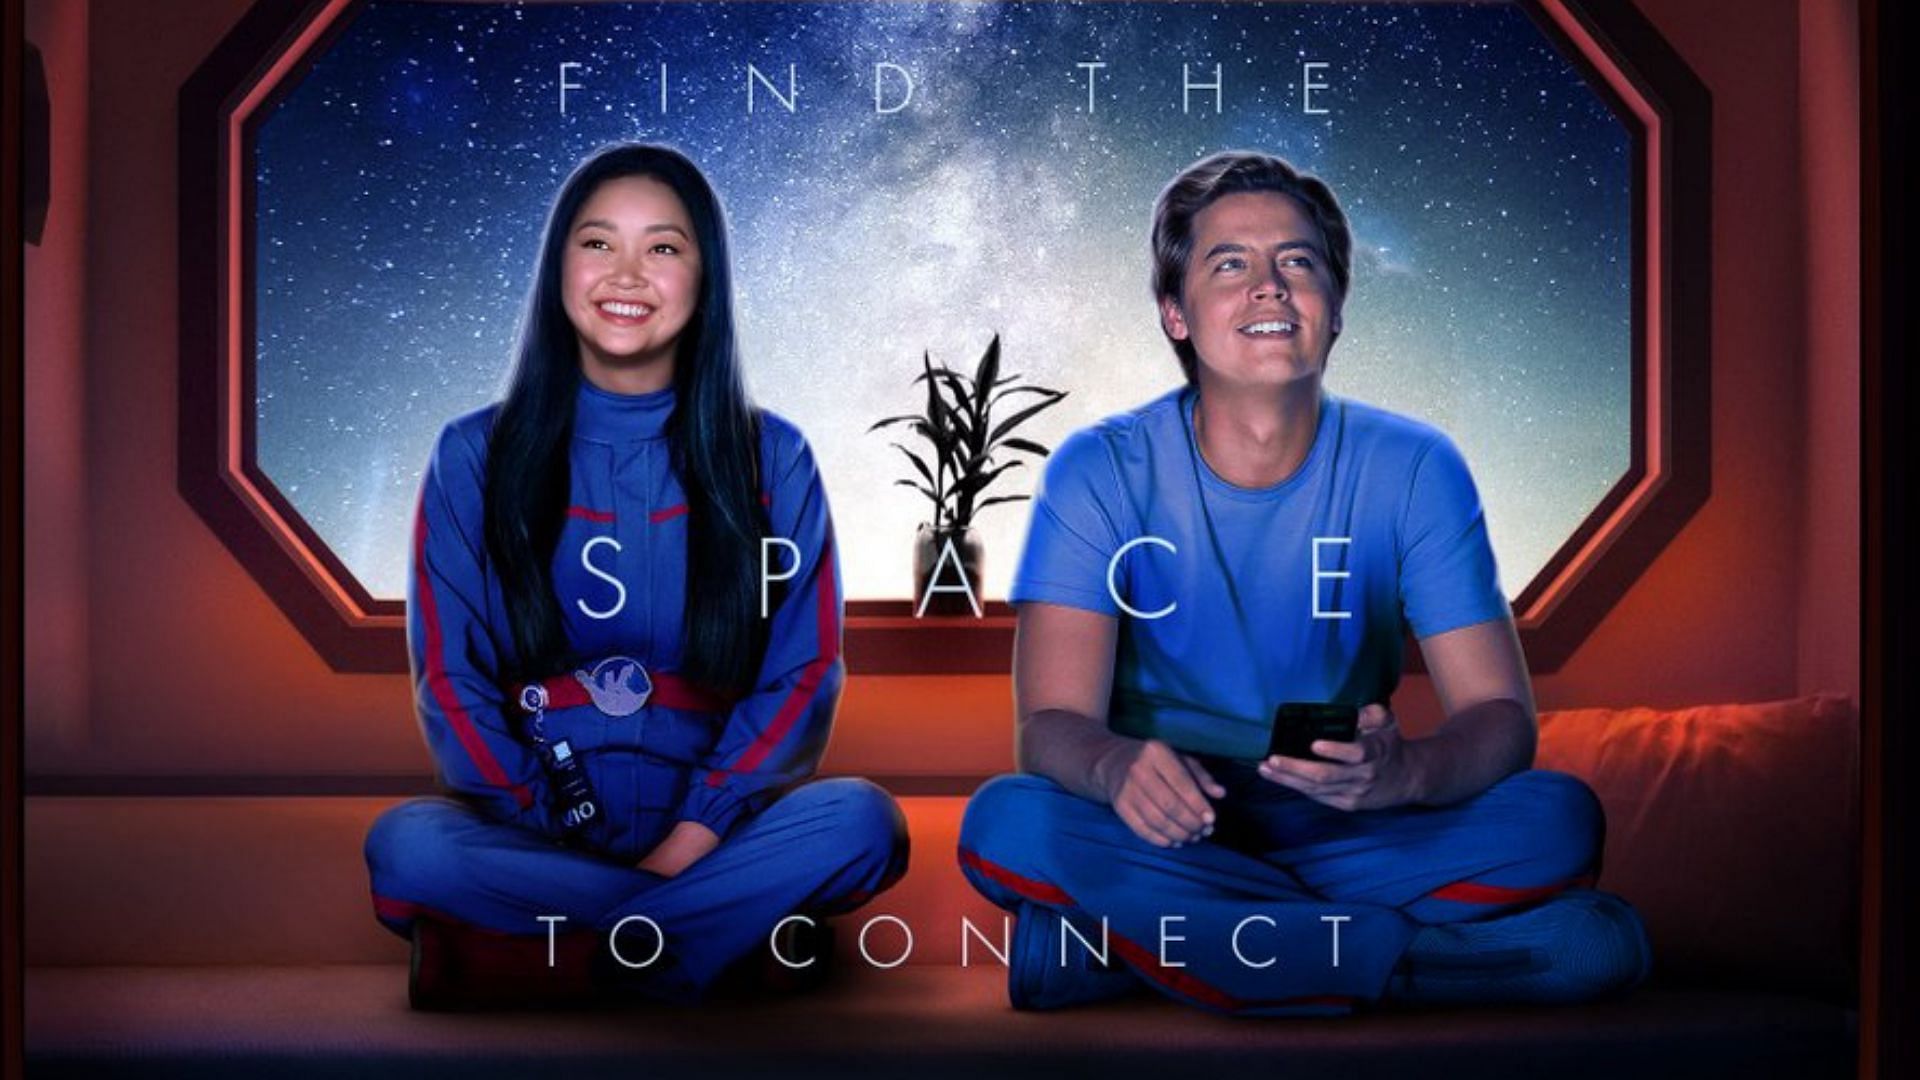 Moonshot is an upcoming sci-fi romantic comedy movie, directed by Chris Winterbauer, starring Lana Condor and Cole Sprouse (Image via HBO Max @Twitter)